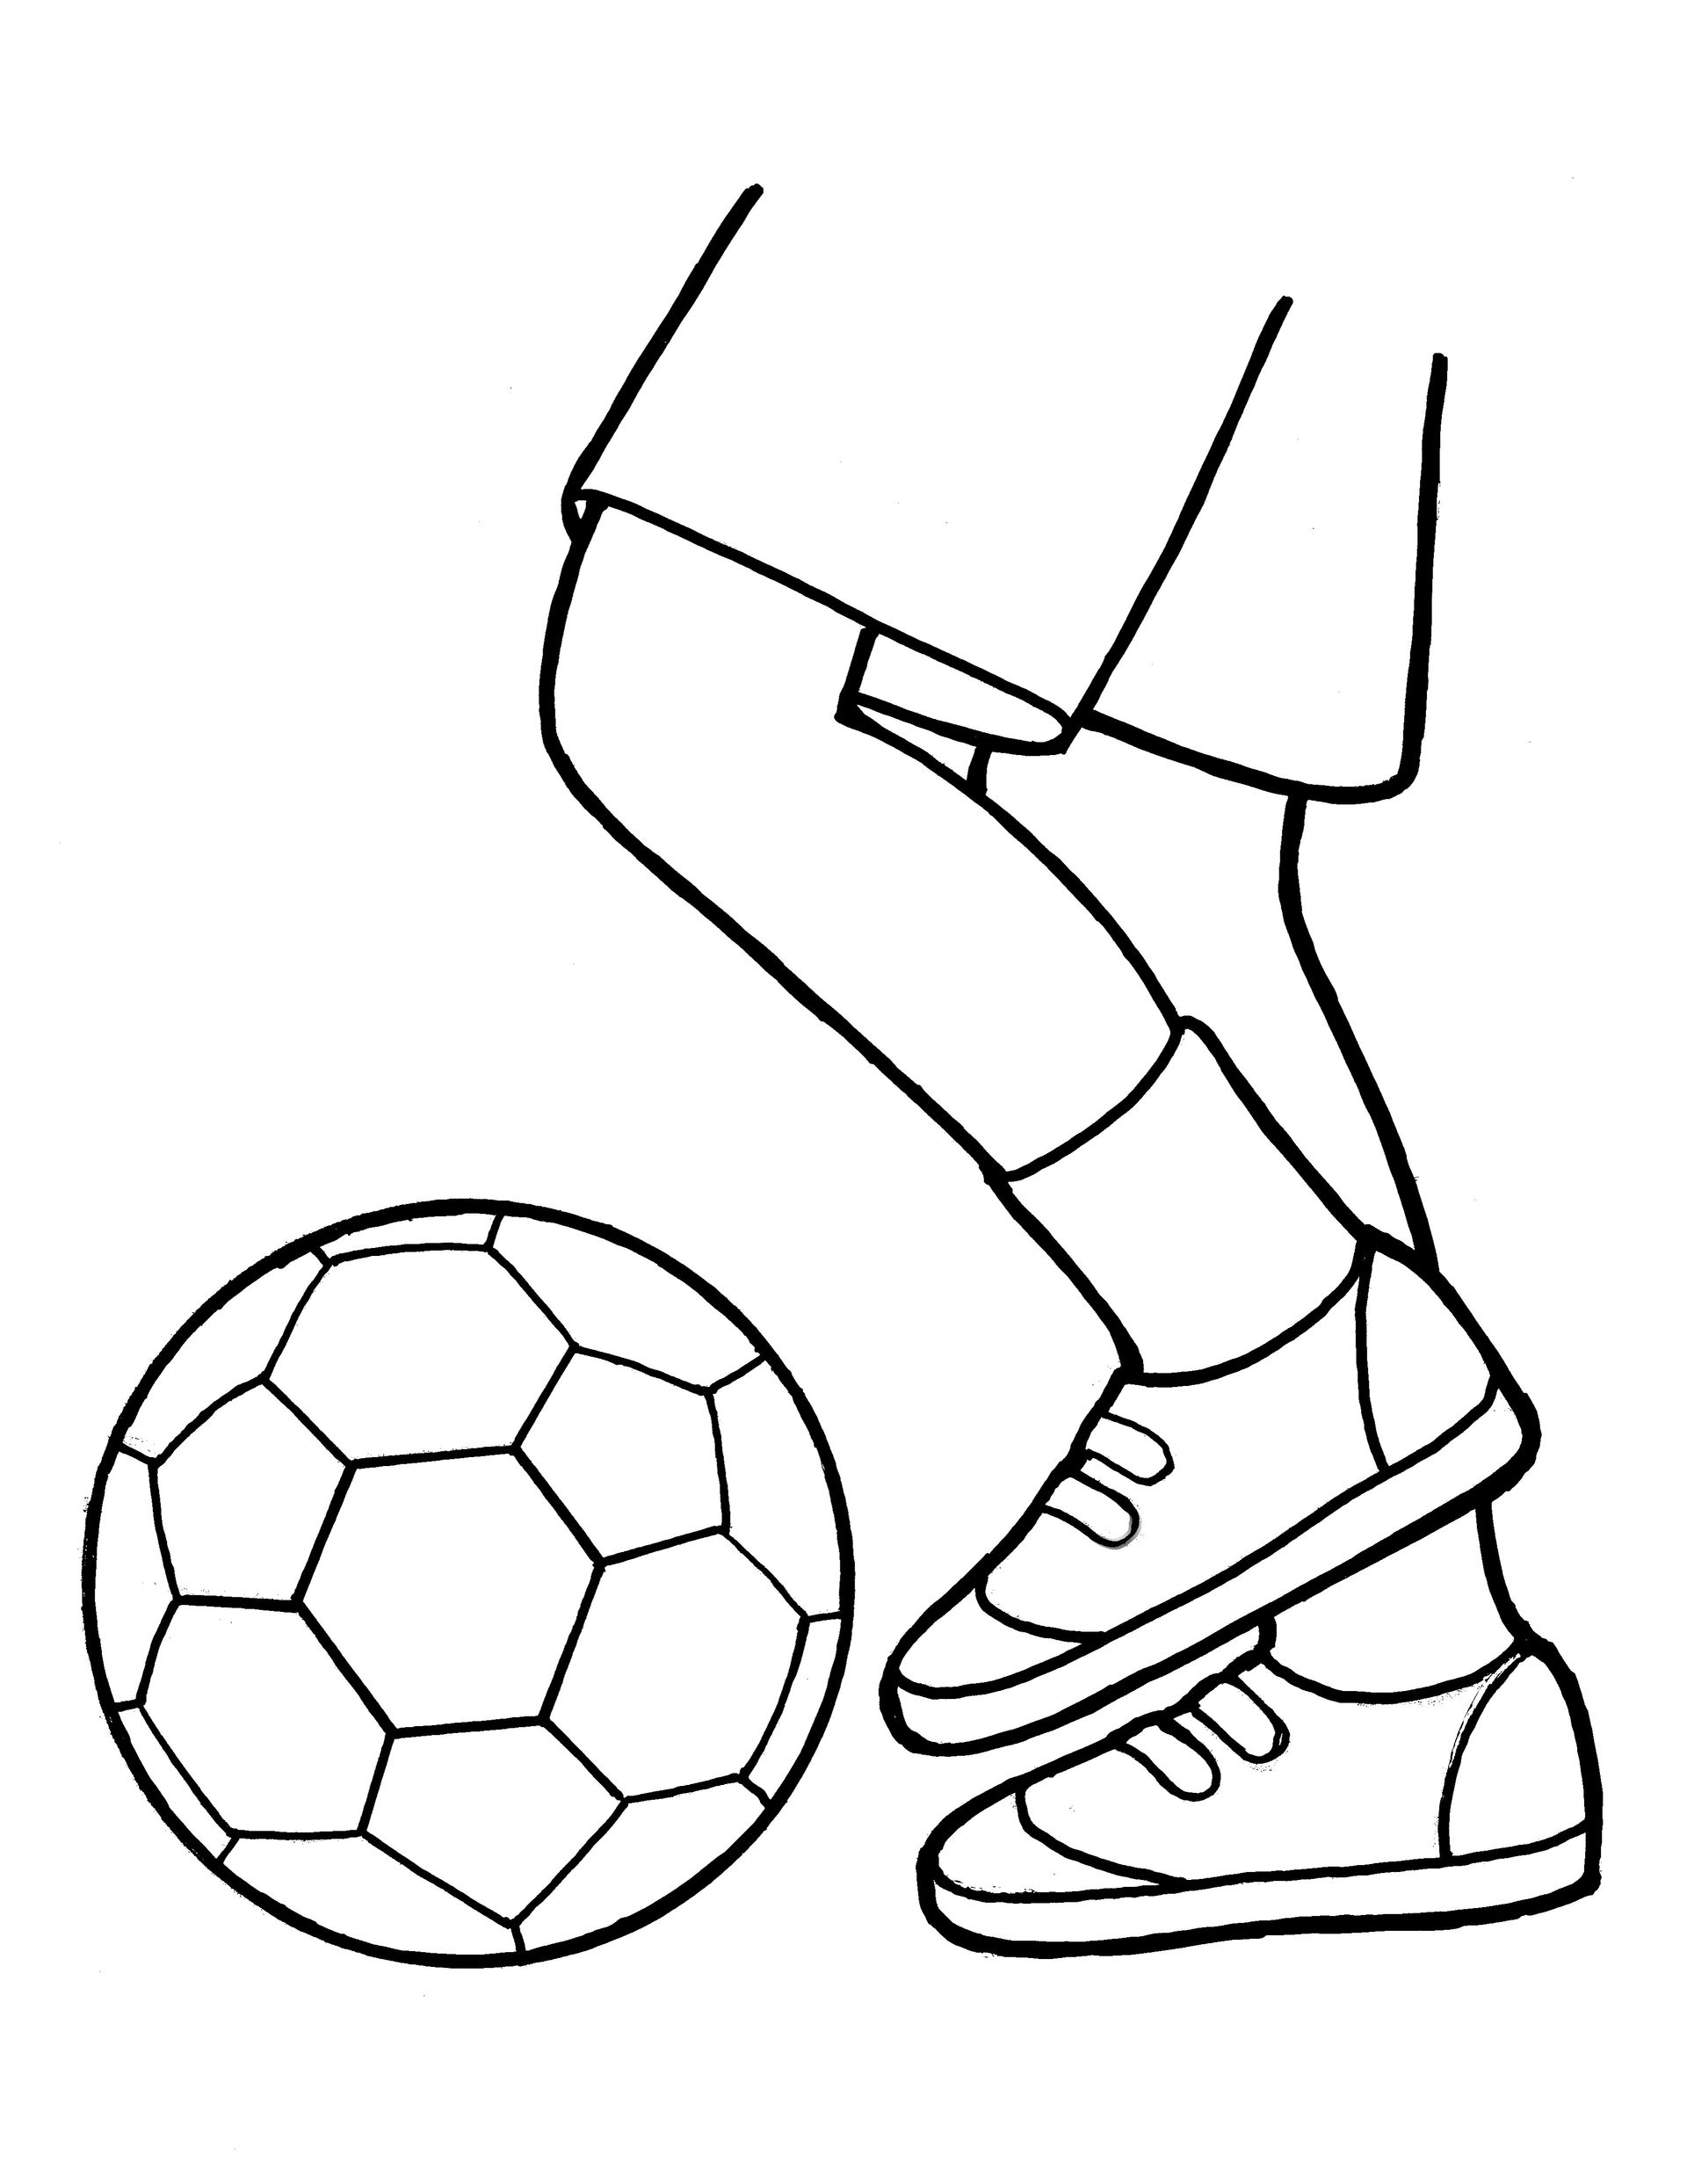 An illustration of a foot kicking a soccer ball, from the nursery manual Behold Your Little Ones (2008), page 47.